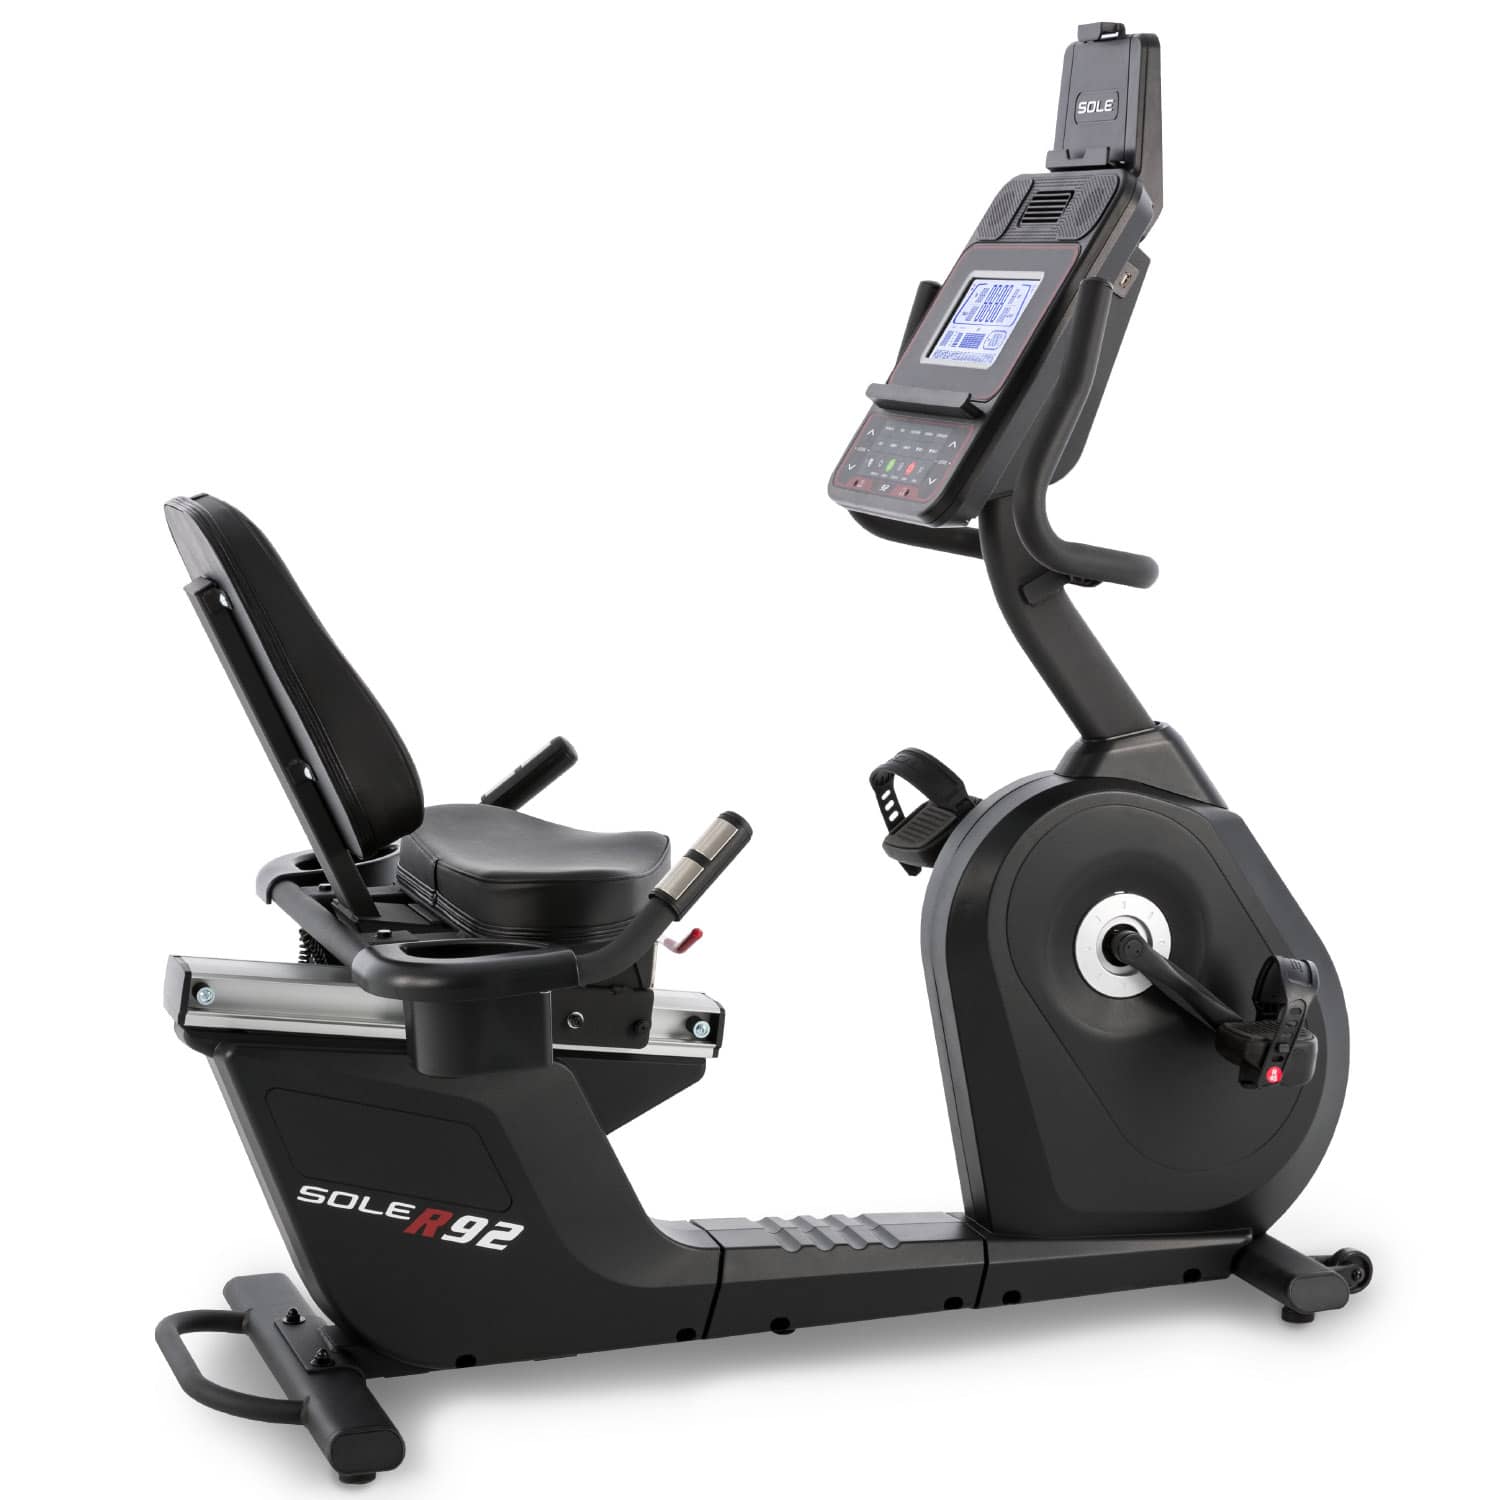 ARGT Sole Fitness R92 Home Use Recumbent Bike